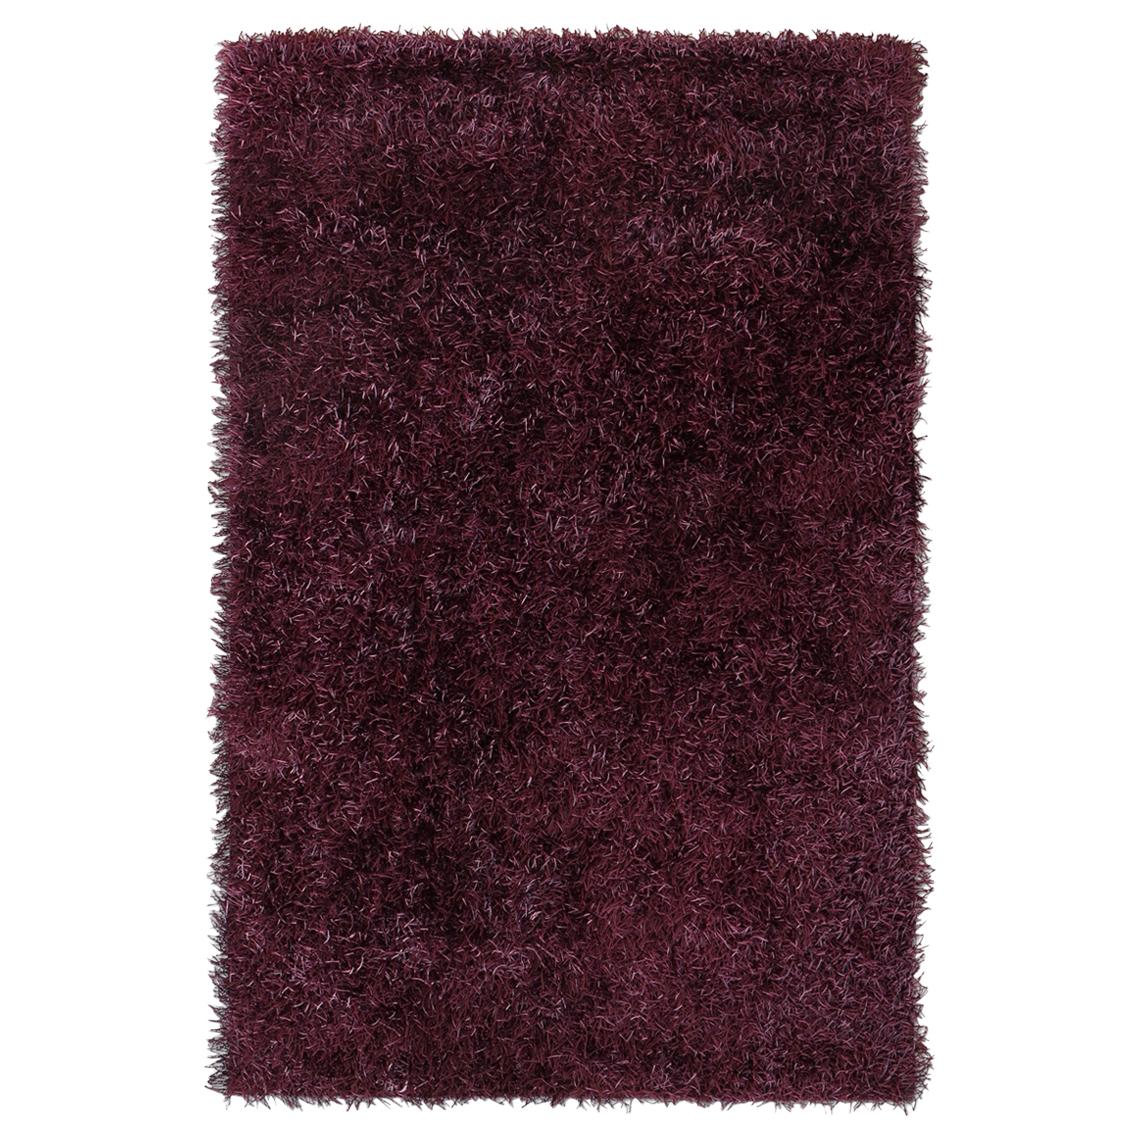 Contemporary Soft Welcoming Purple Rug by Deanna Comellini In Stock 170x240 cm For Sale